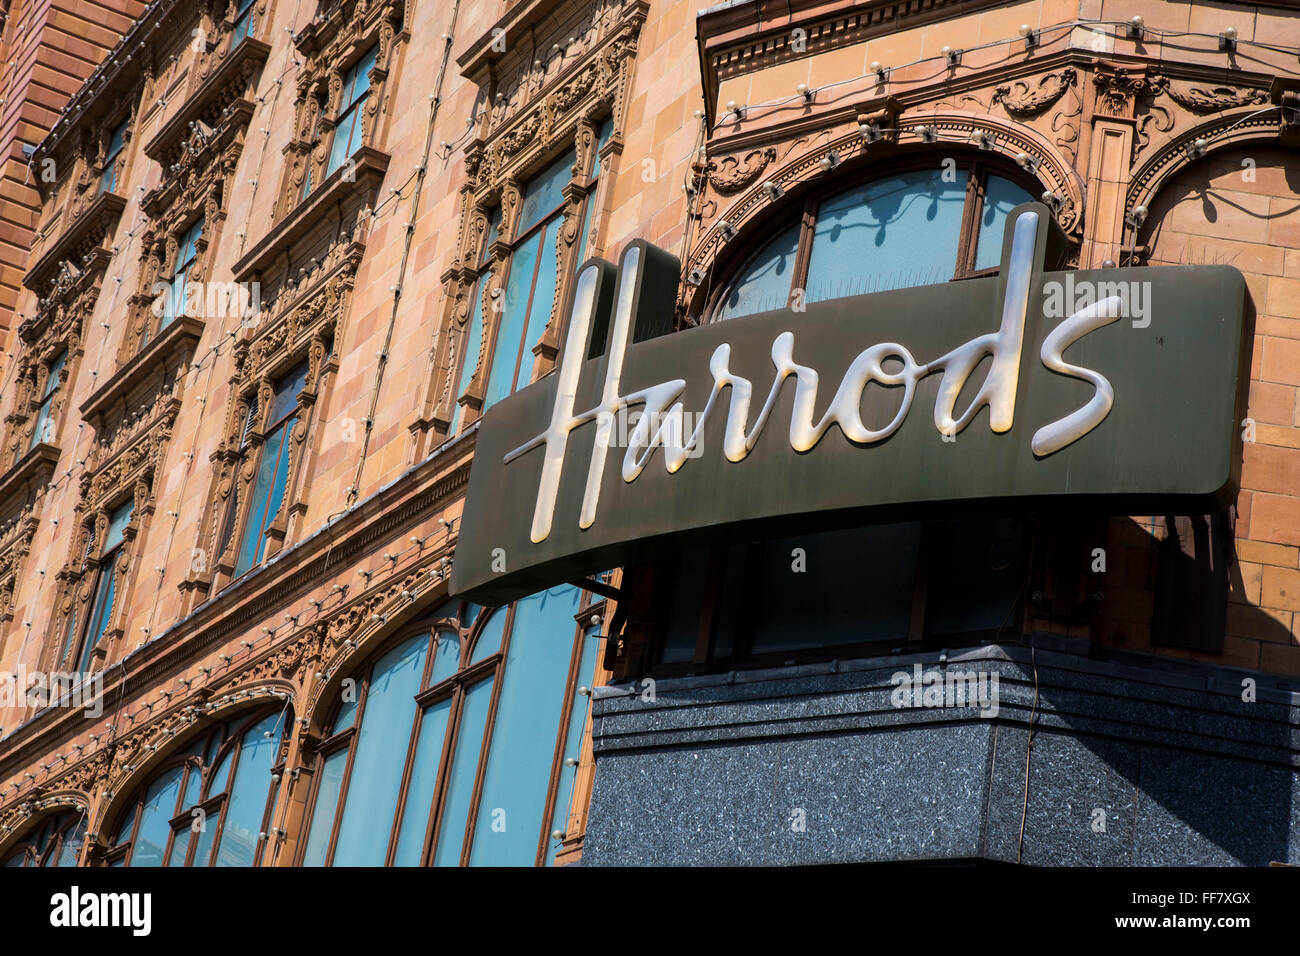 The iconic Harrods sign on the store building in Knightsbridge, London, United Kingdom. Stock Photo